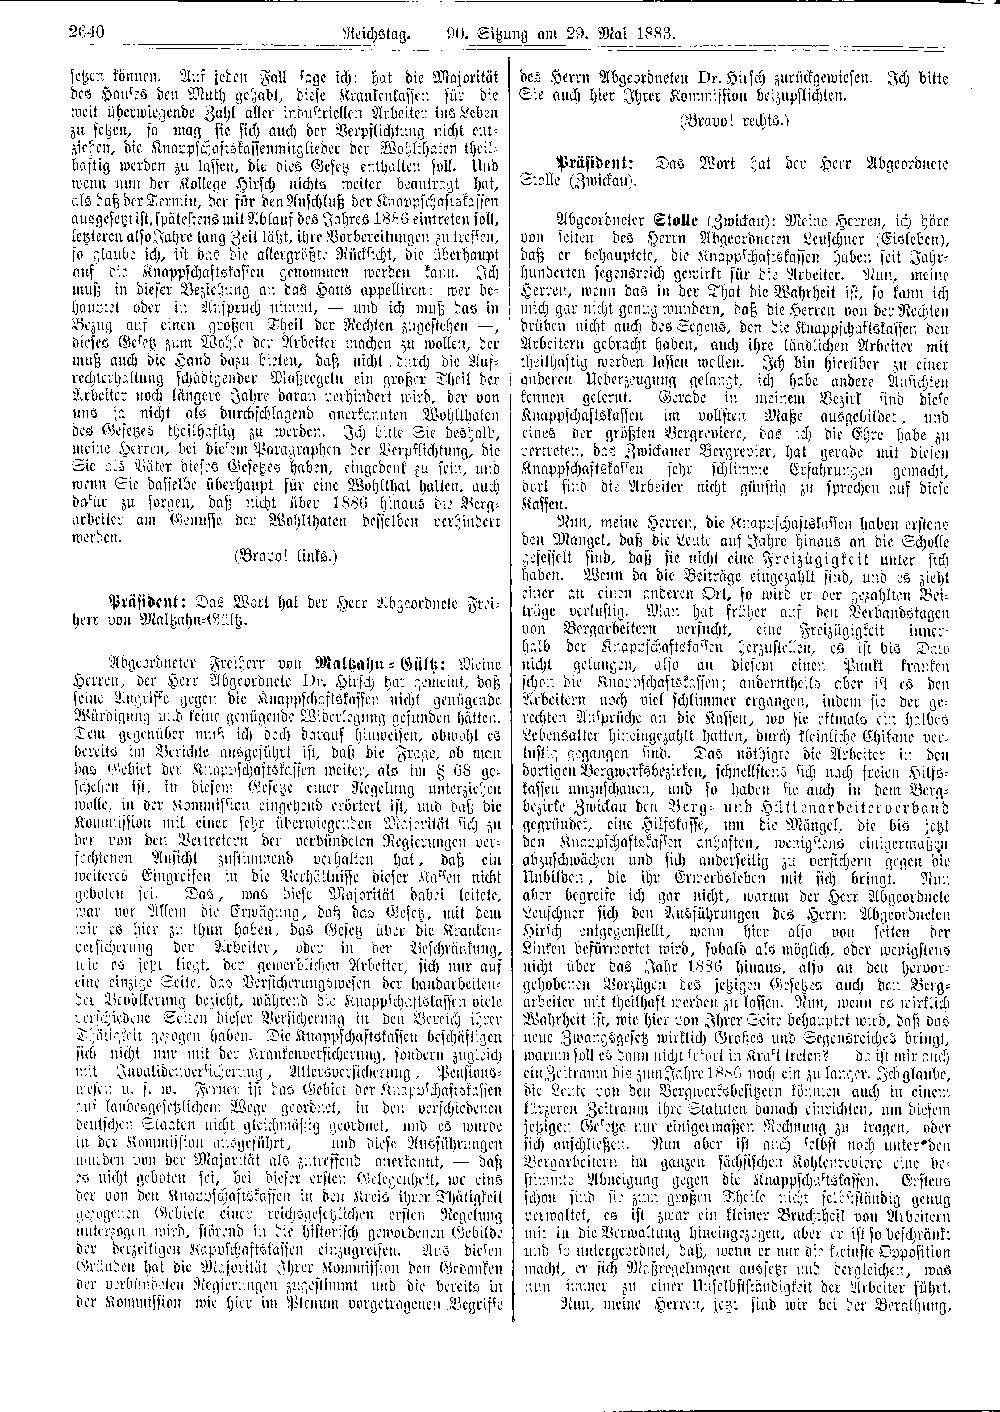 Scan of page 2640